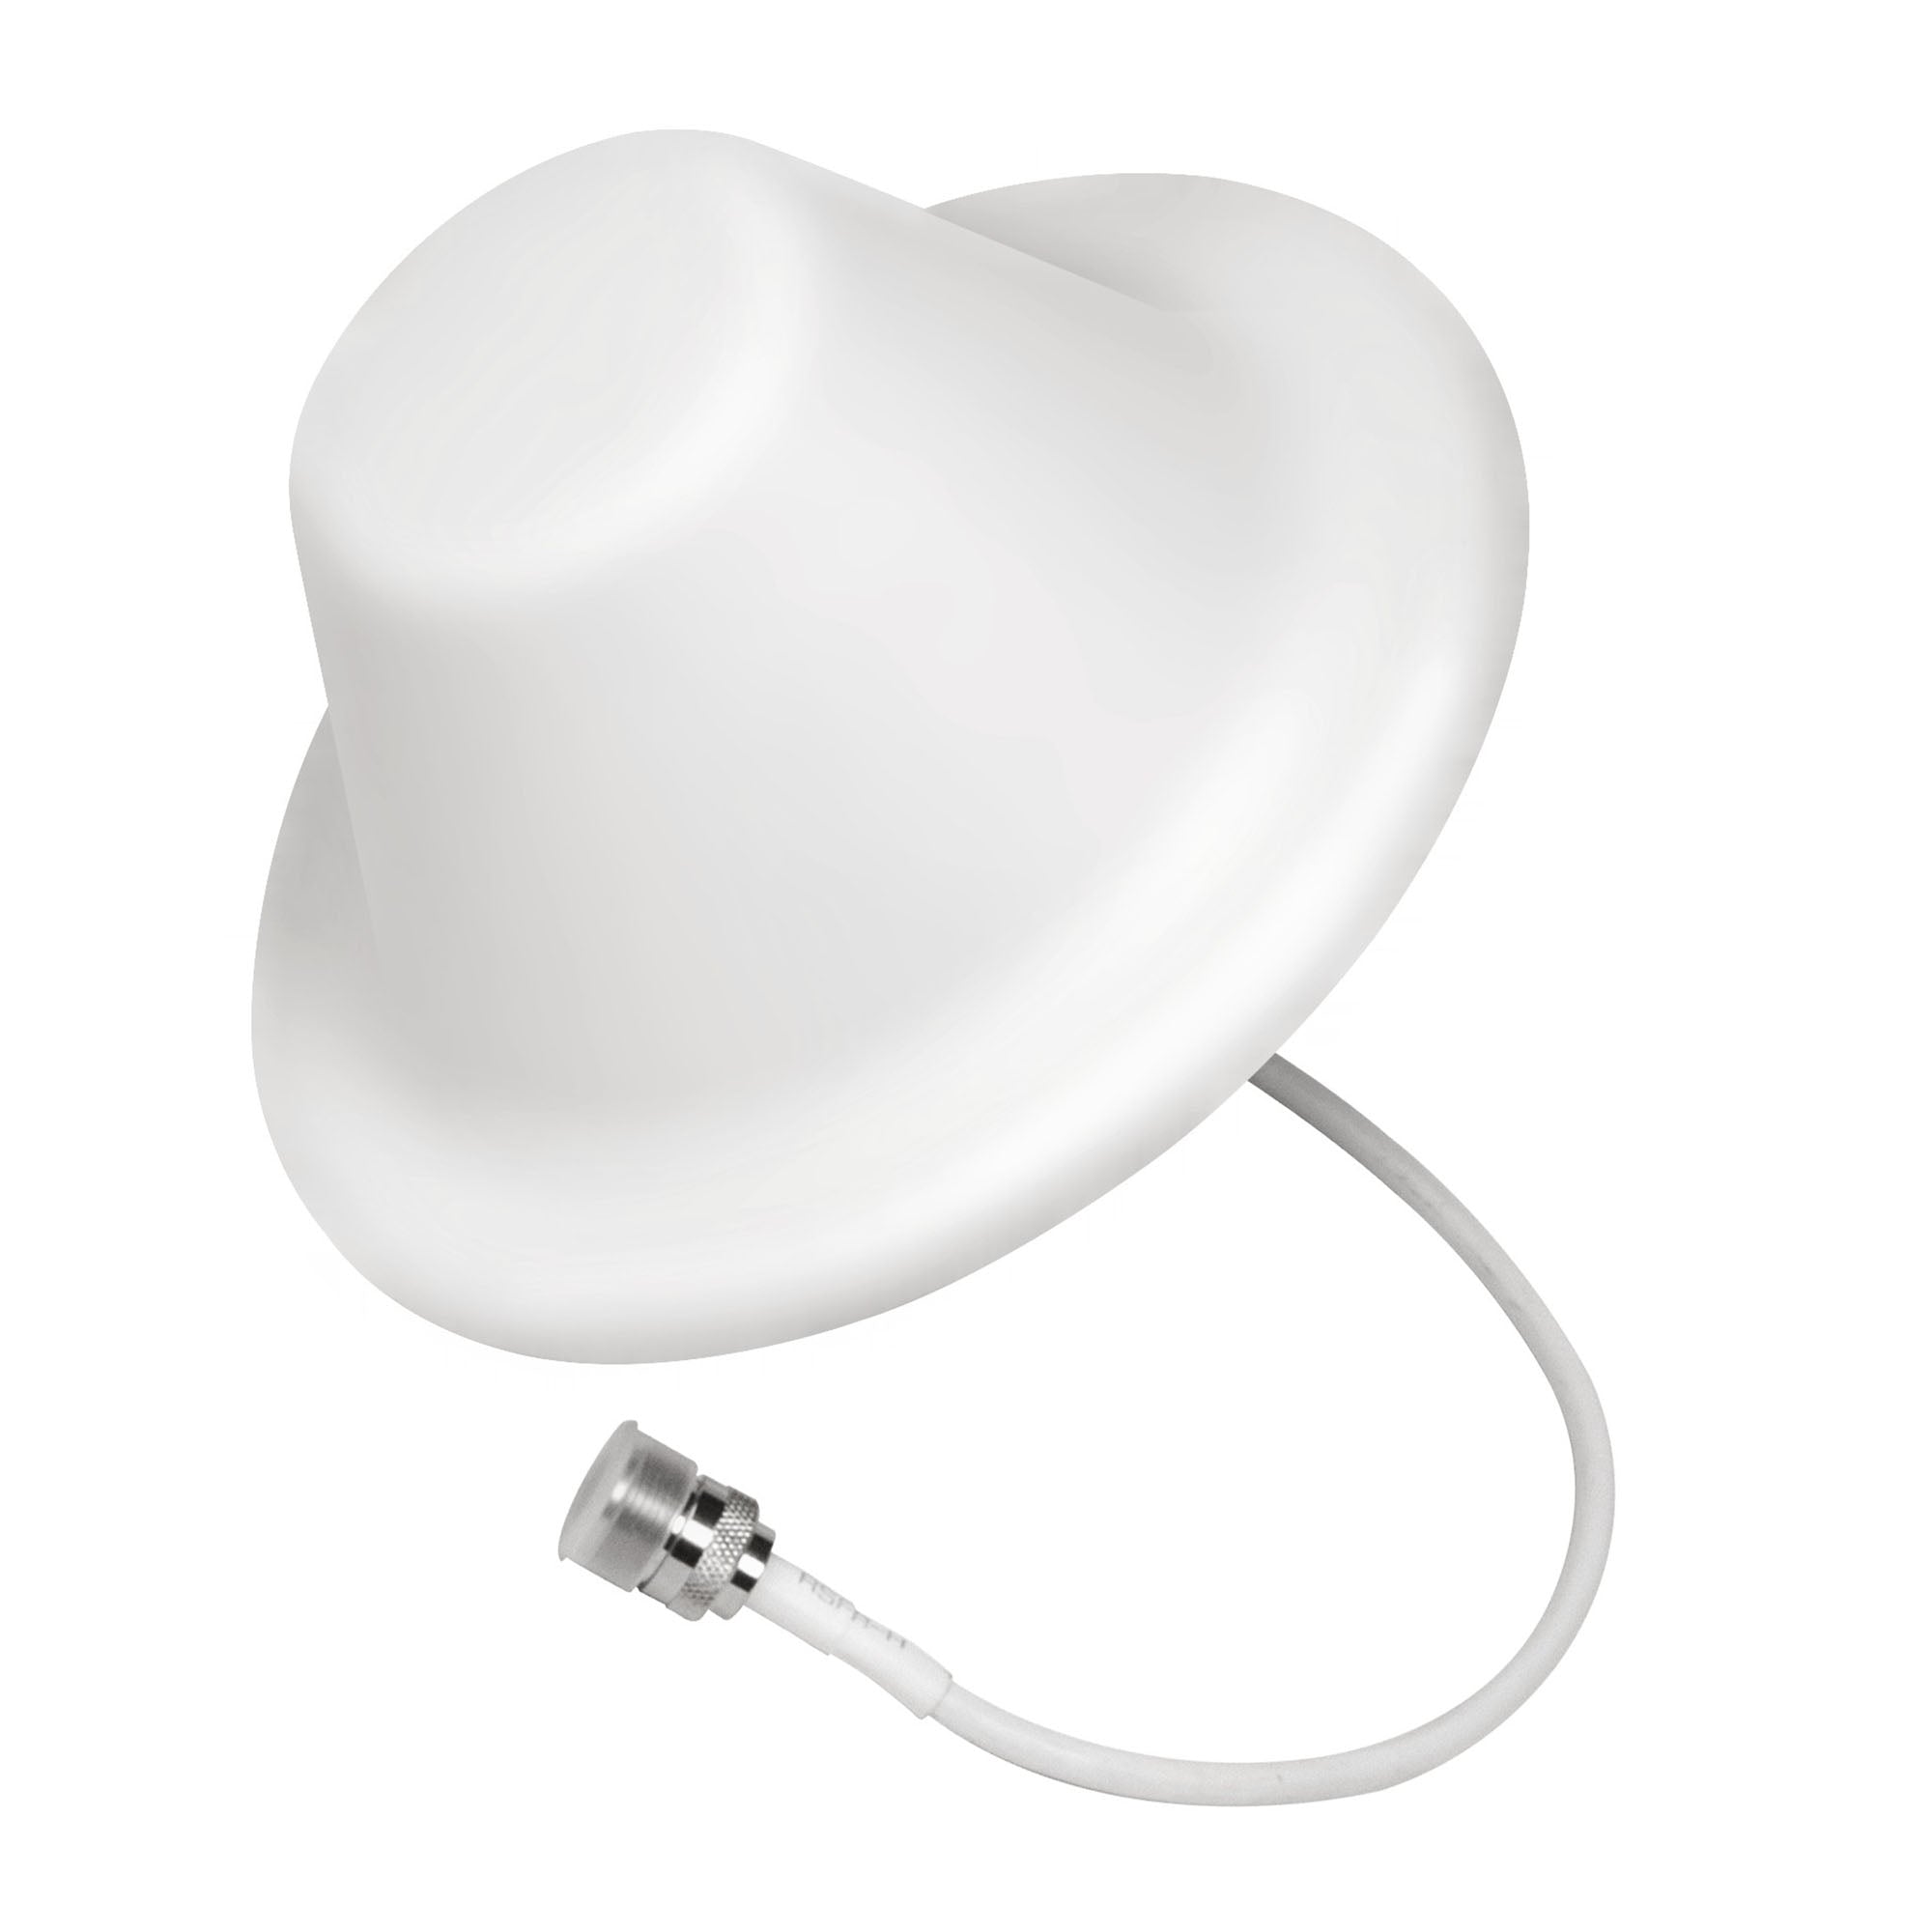 Wilson 4G Dome Antenna 50 ohm w/ 12 in. Pigtail N-Female - 15-01850